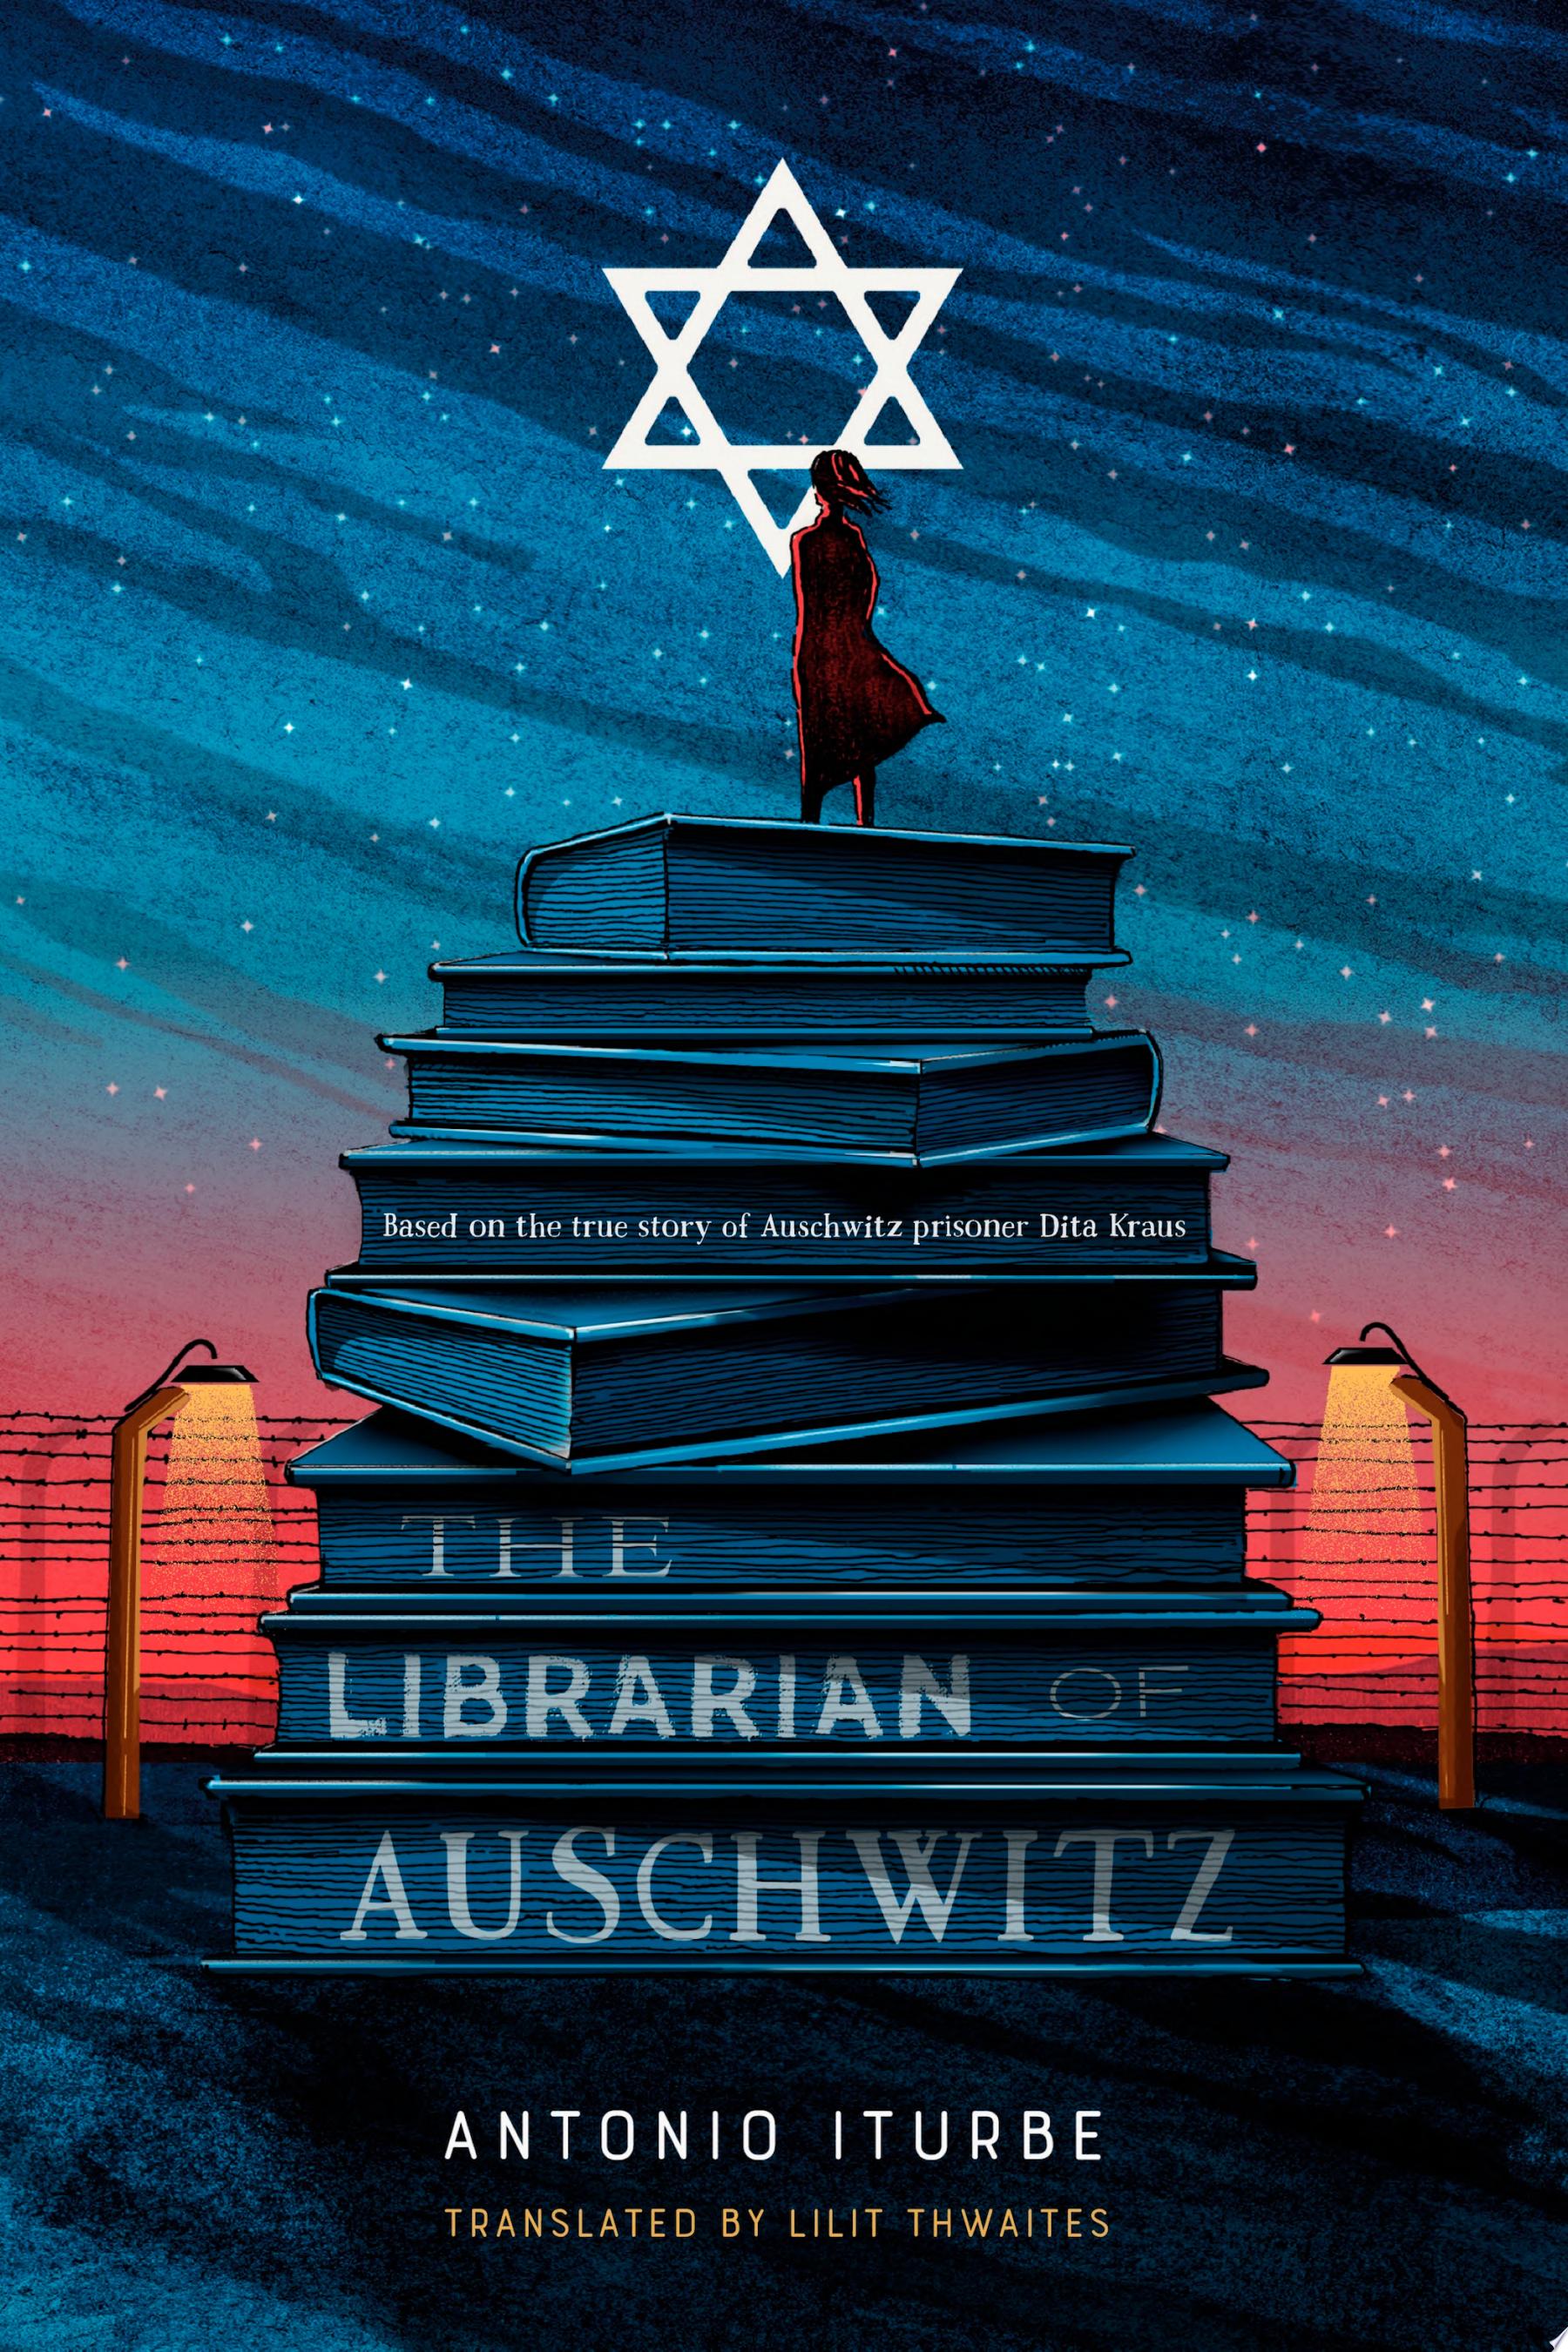 Image for "The Librarian of Auschwitz"